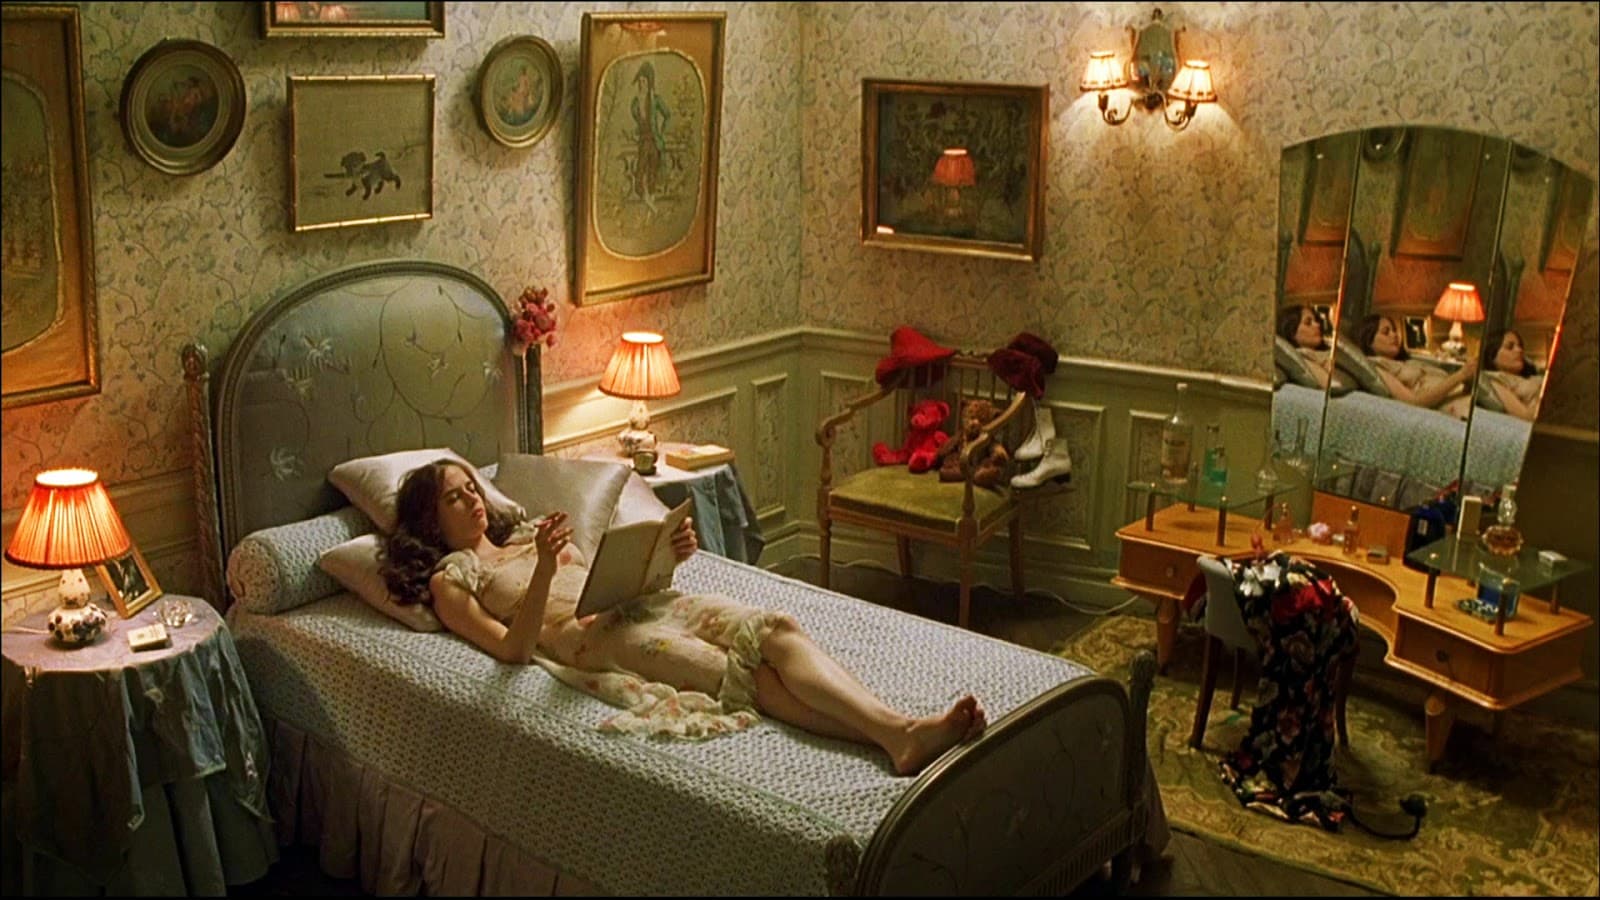 the Dreamers bedroom_10 of the most beautiful bedrooms seen in TV and film